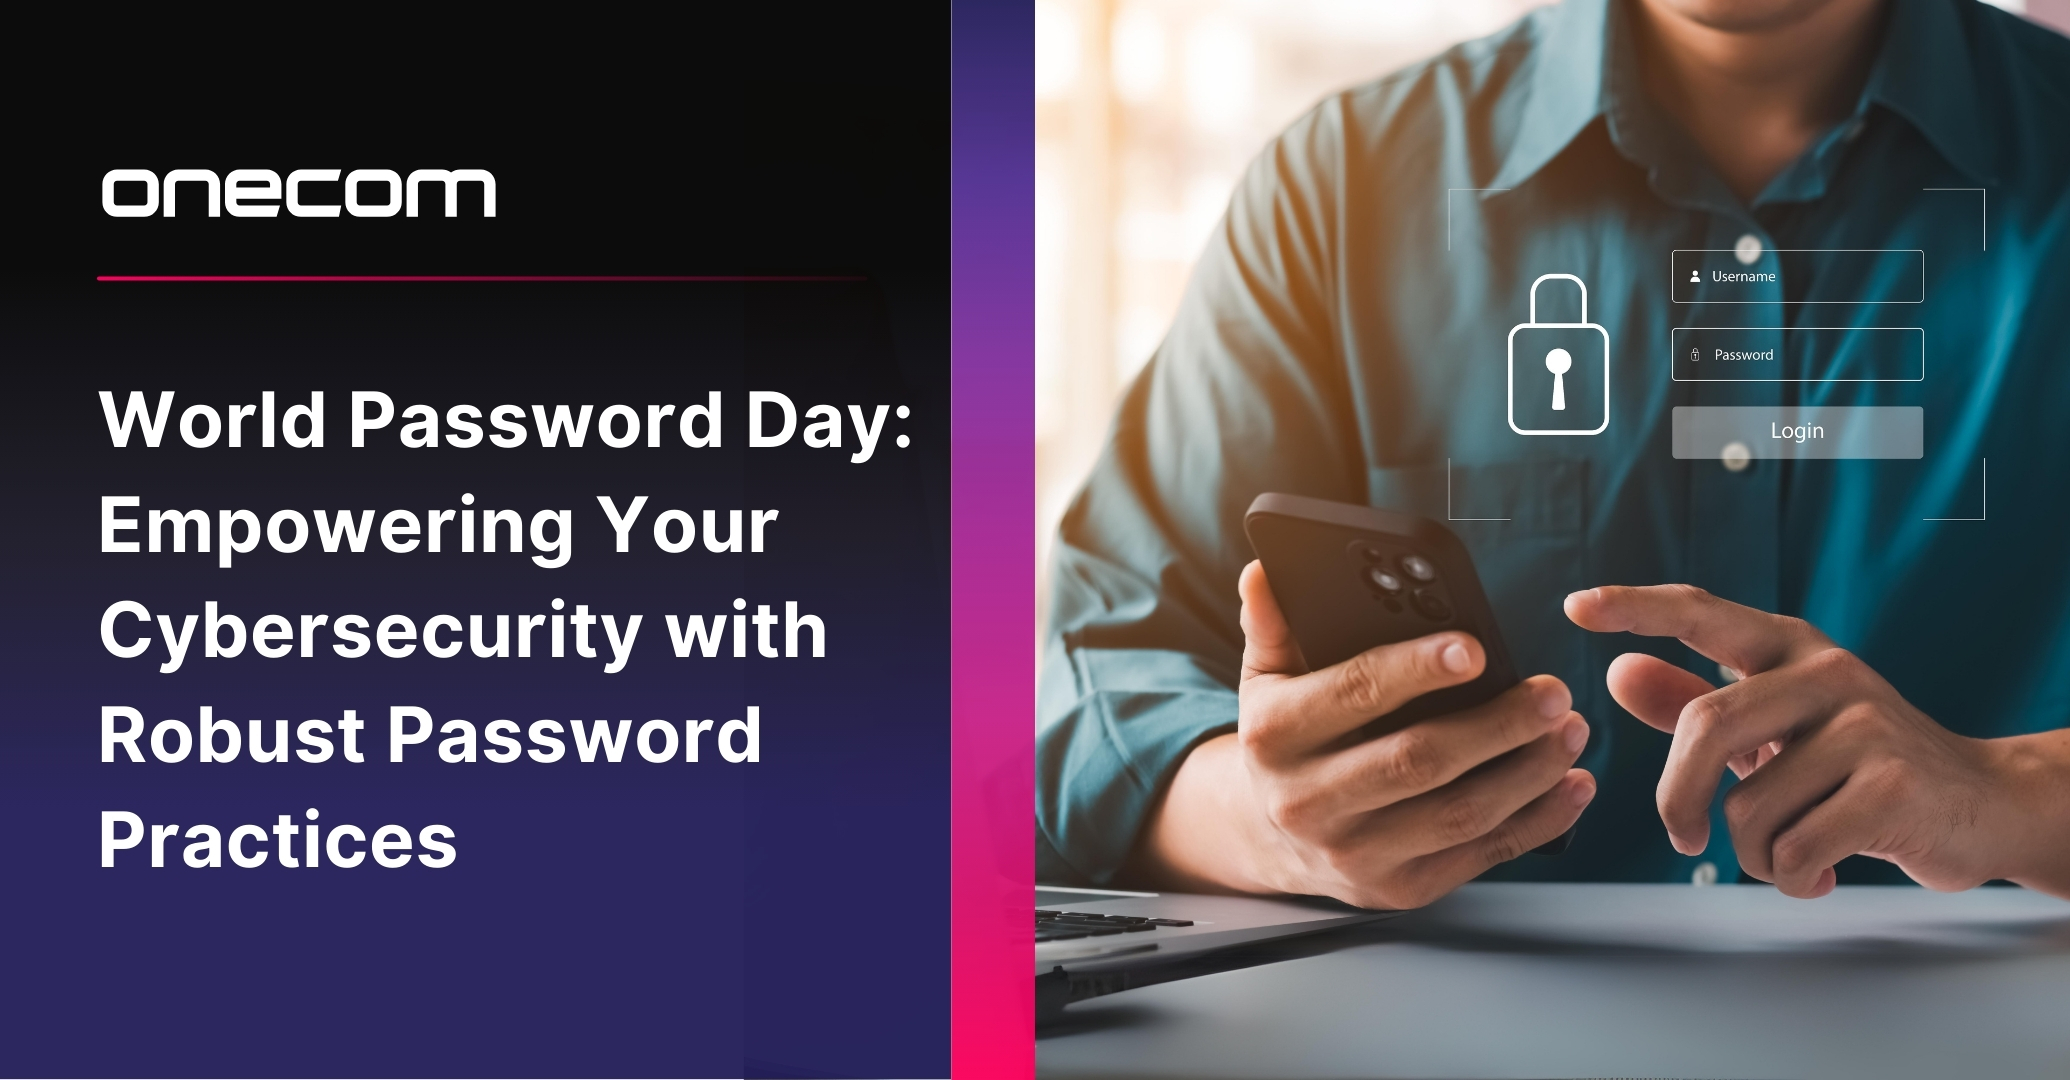 World Password Day: Empowering Your Cybersecurity with Robust Password Practices